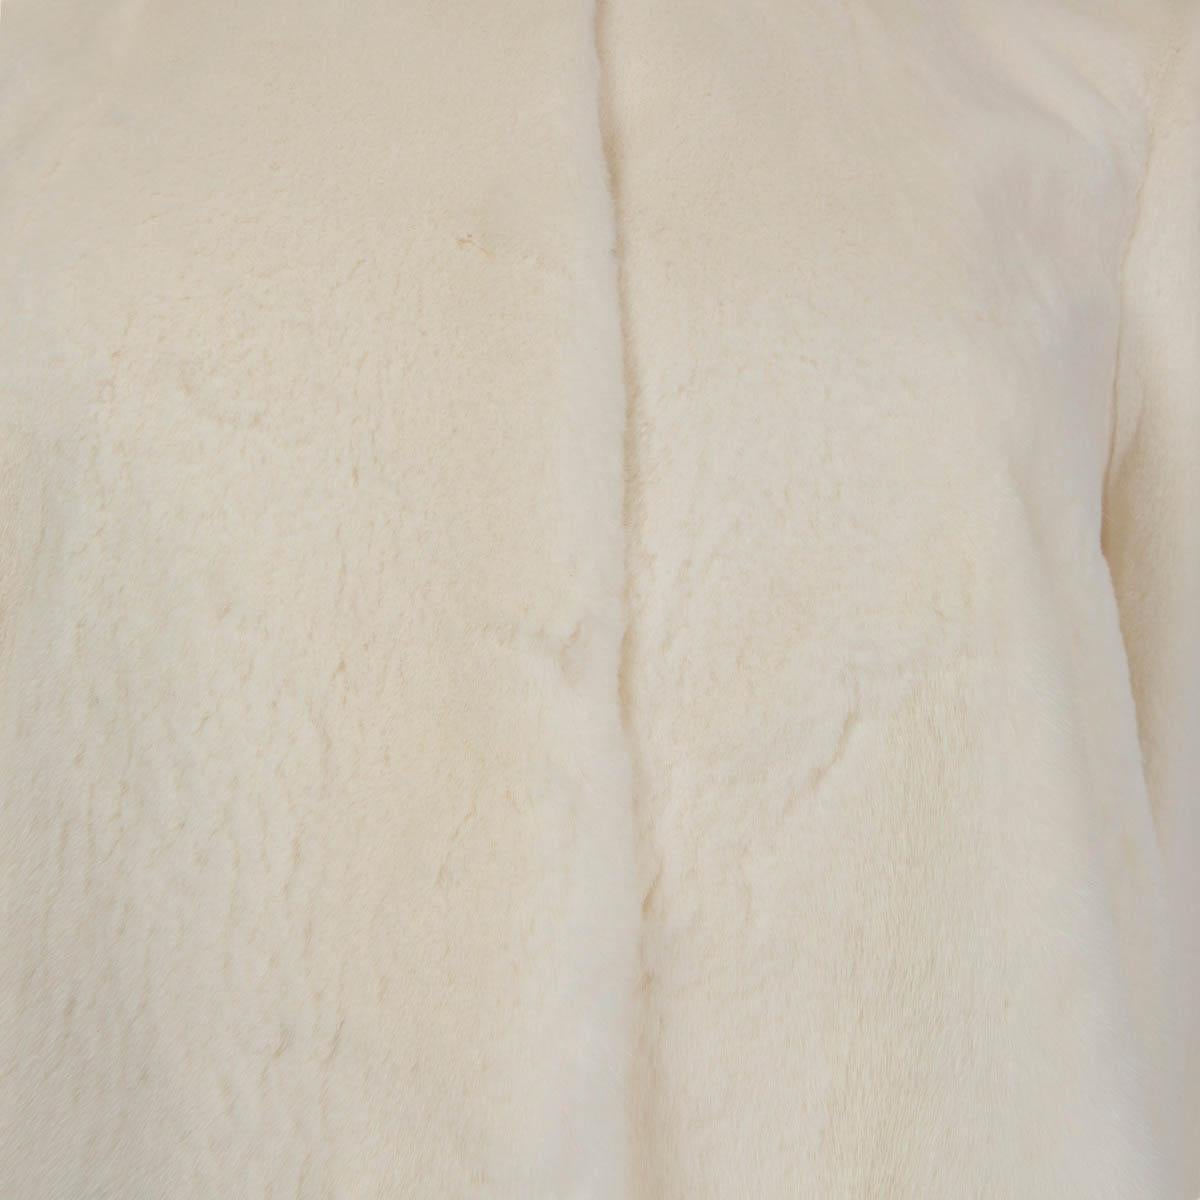 Women's CHRISTIAN DIOR ivory white MINK FUR COLLARLESS CROPPED Jacket 38 S For Sale